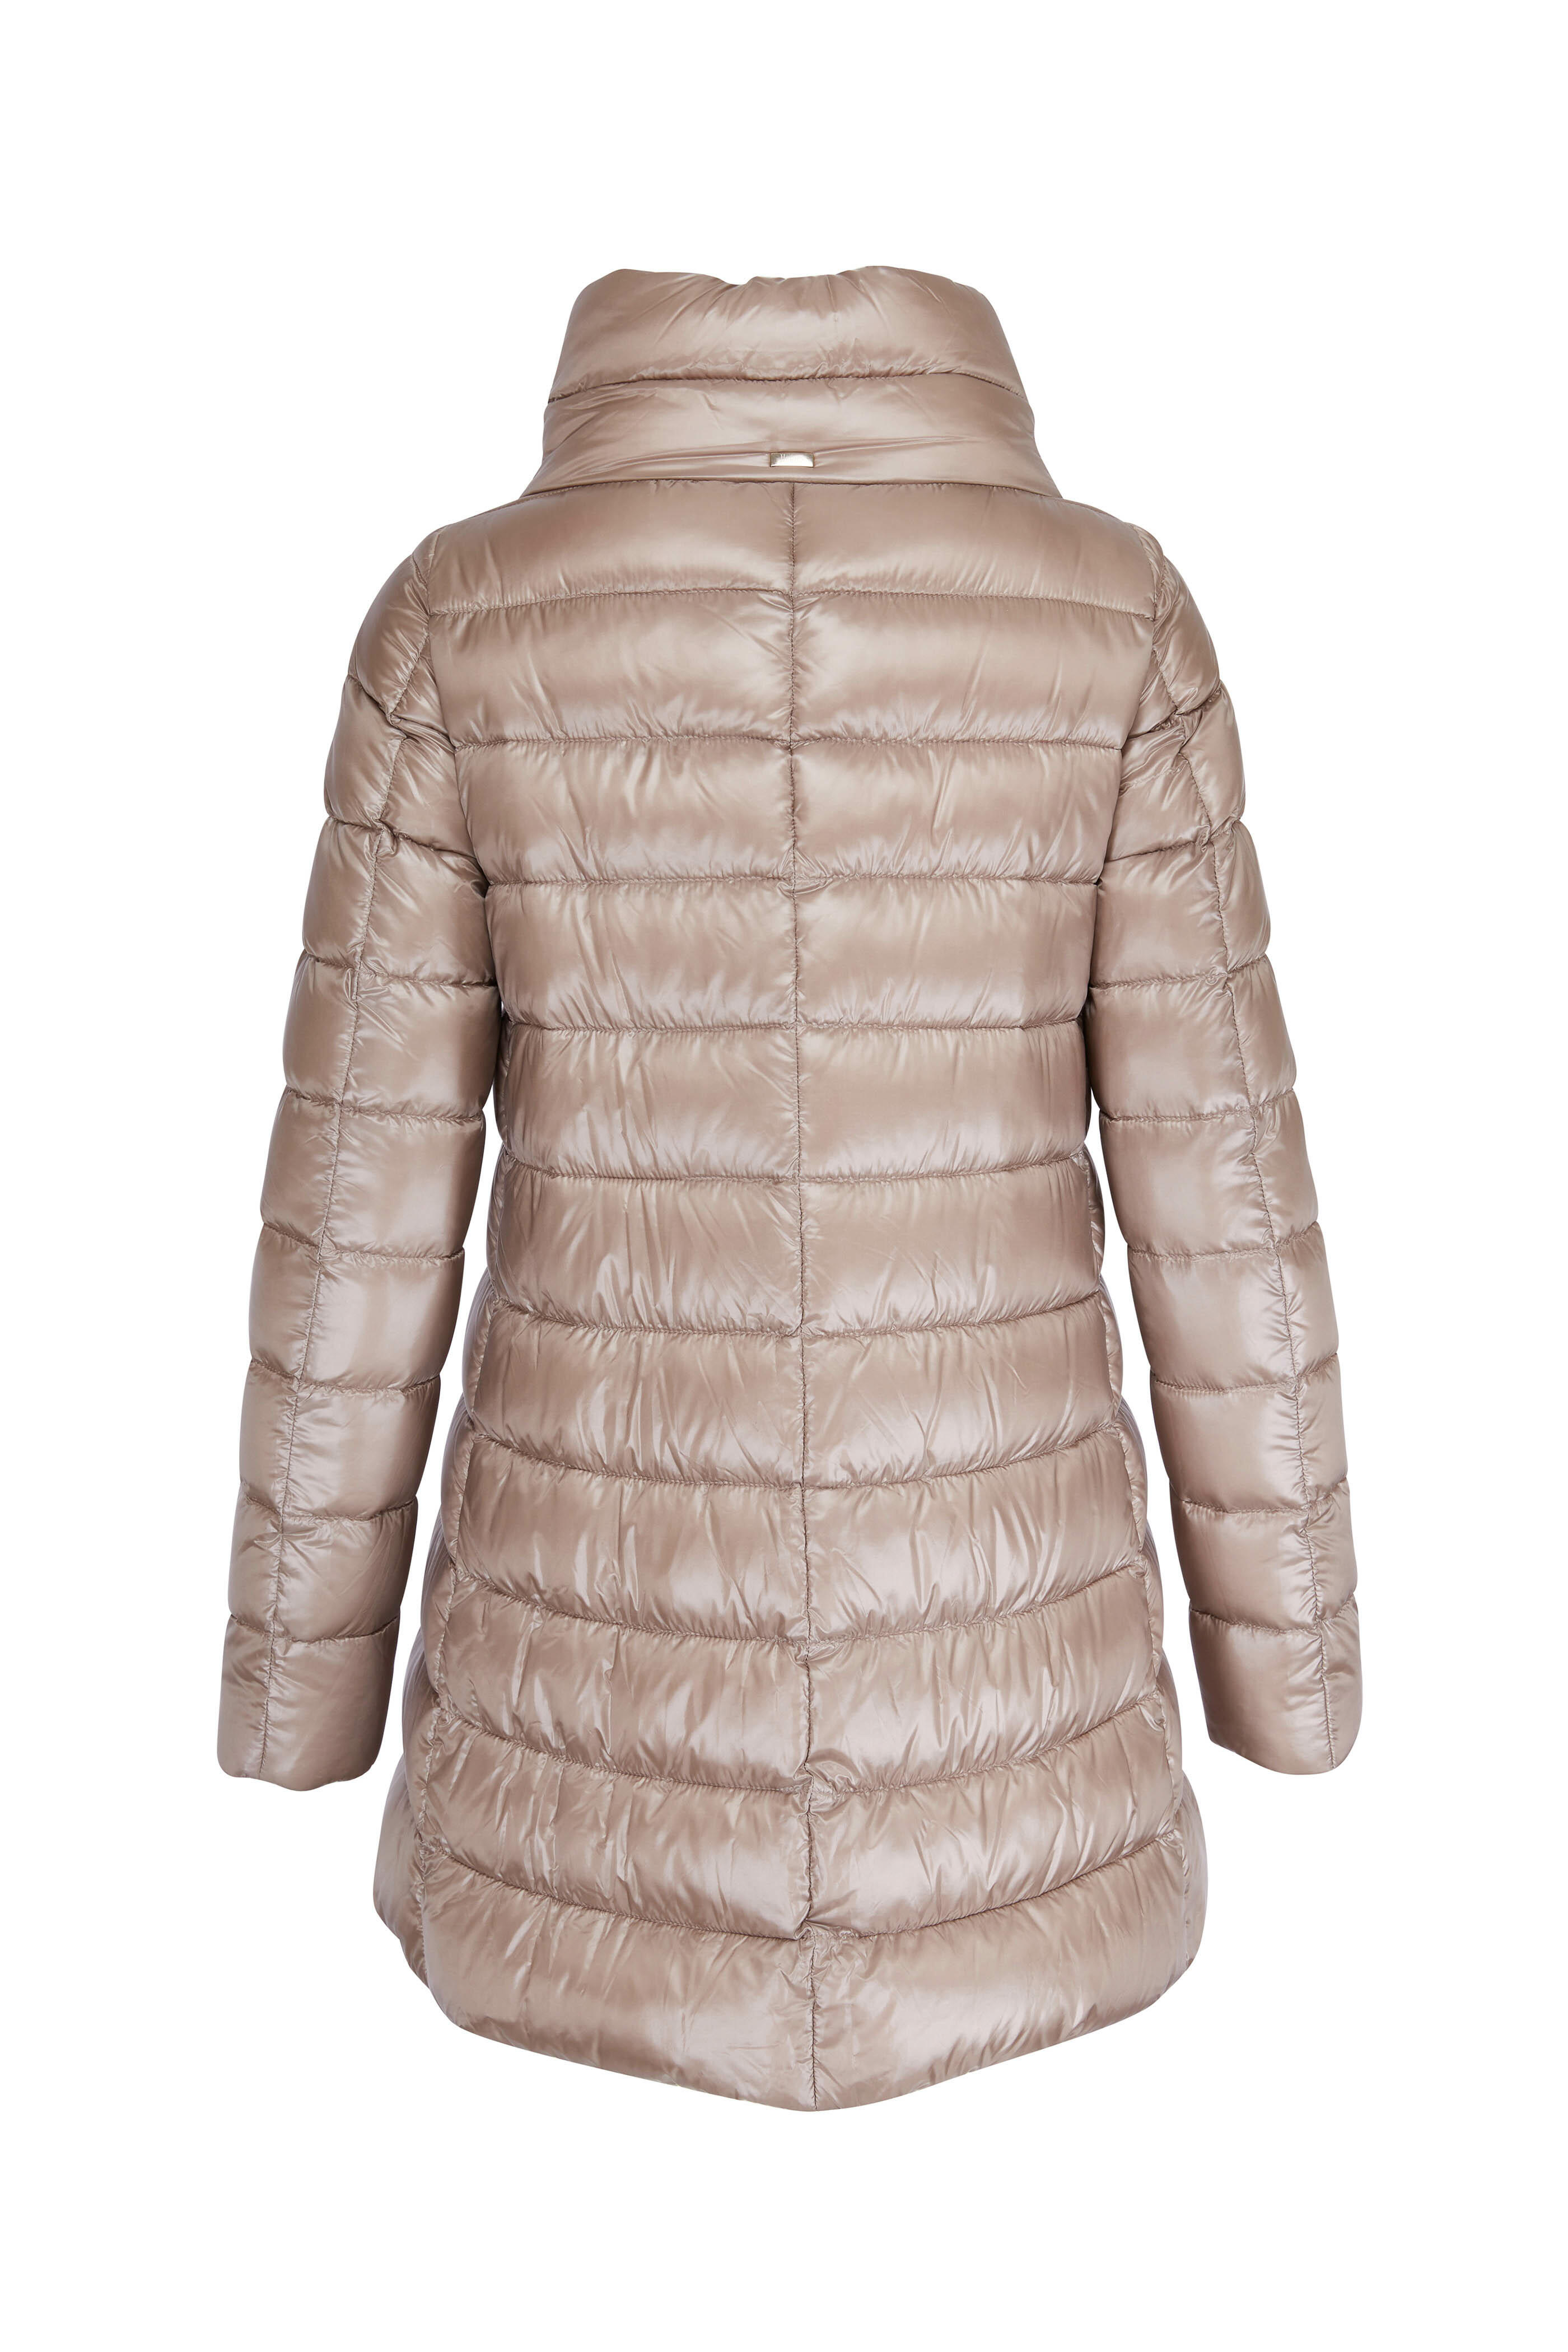 Herno - Amelia Classic Taupe Ultralight Down Jacket